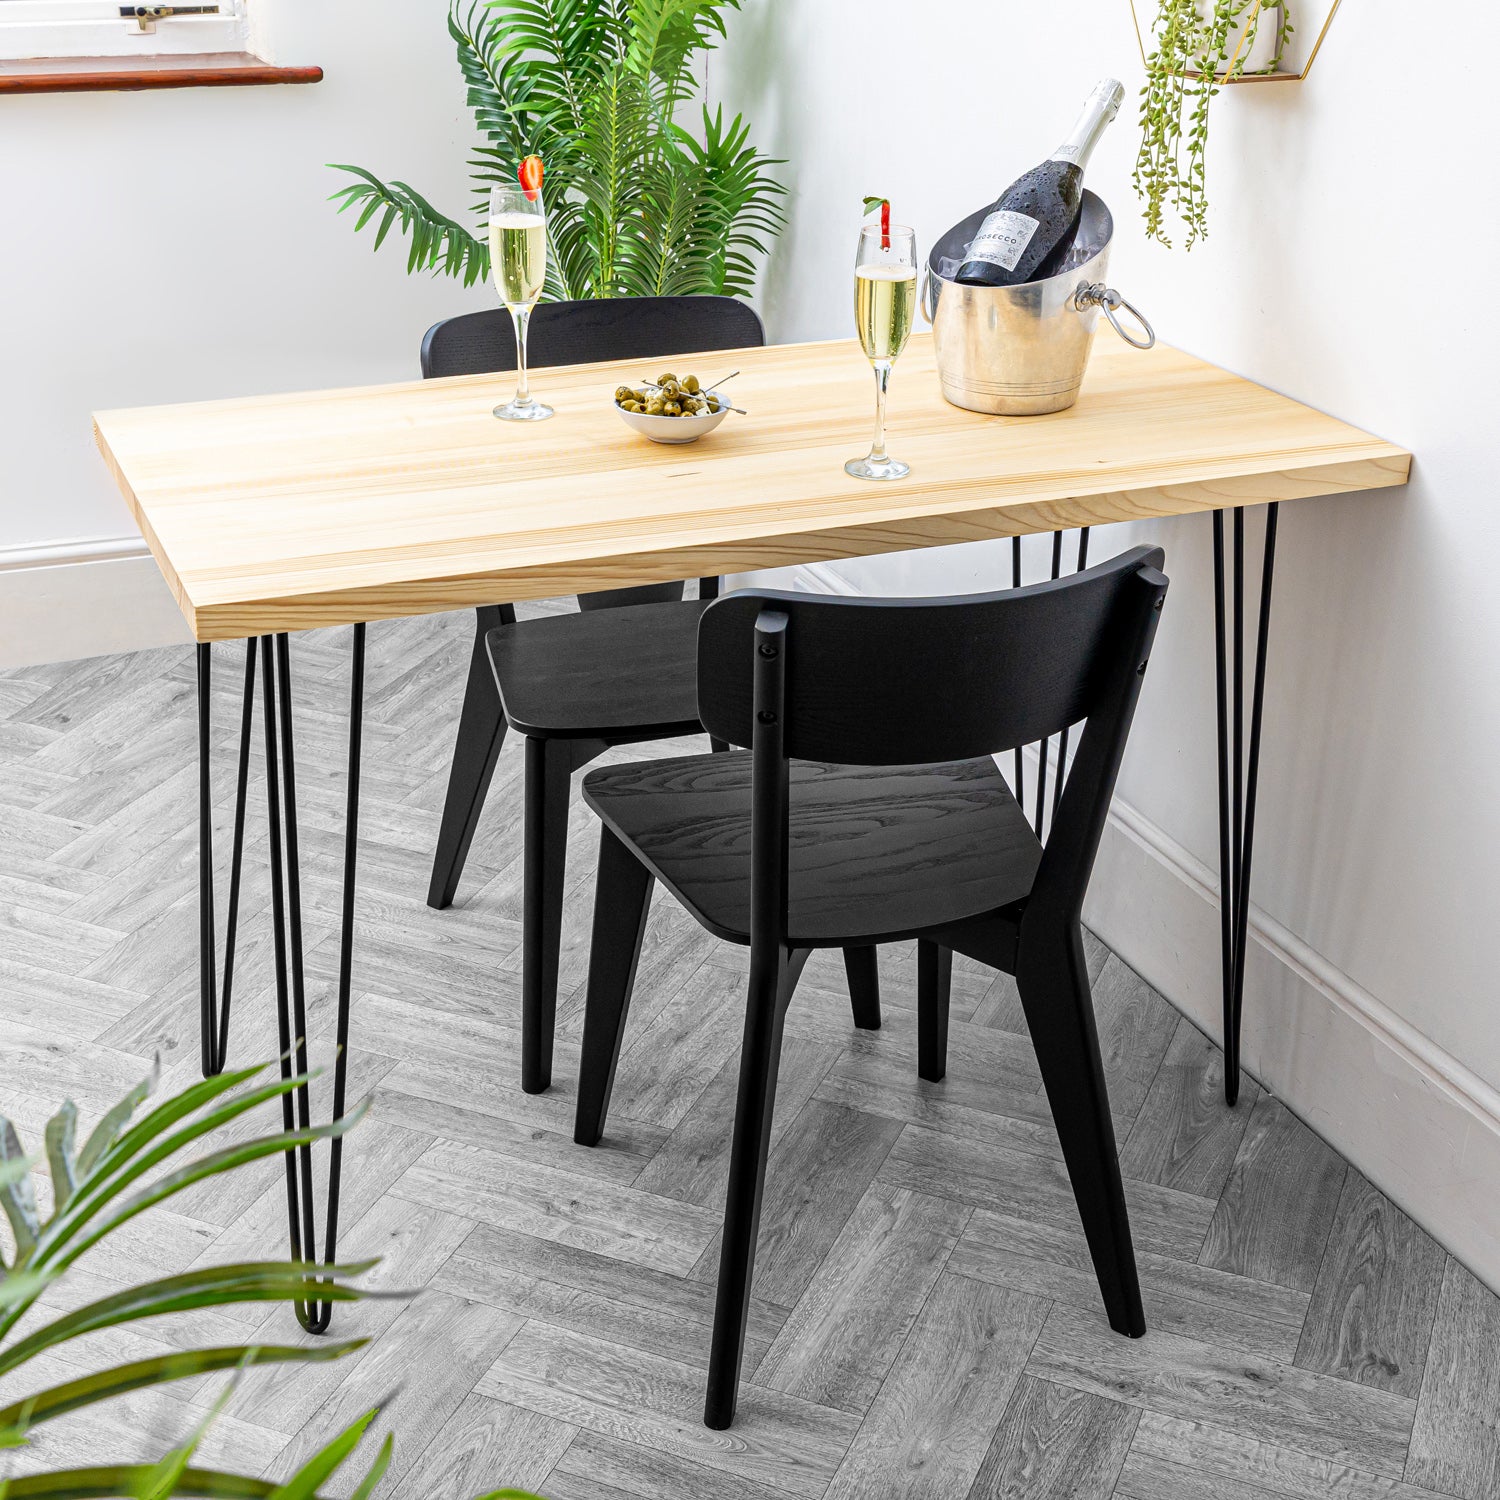 Pine Solid Wood Table with Black Hairpin Legs